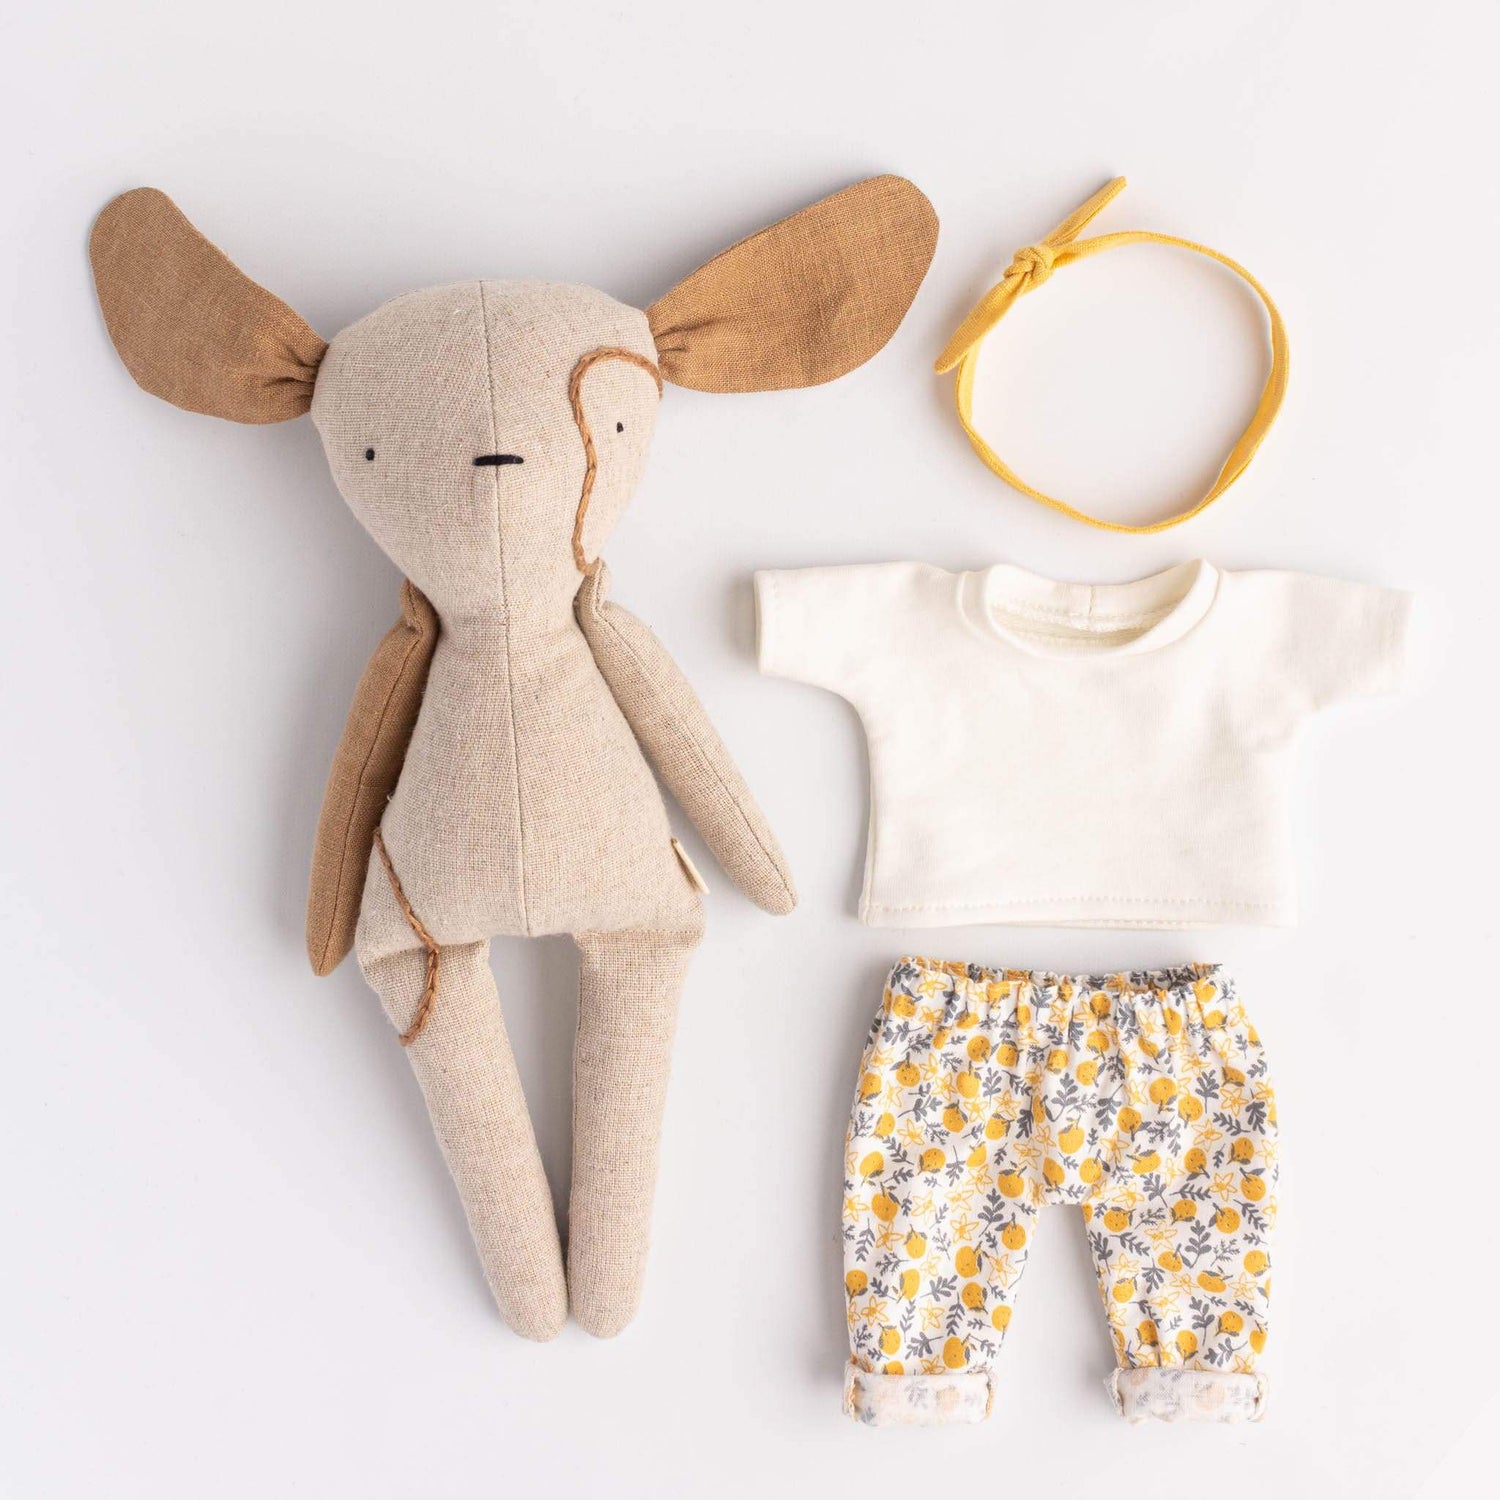 Dog Bloom - Handmade Soft Linen Toy Dog With Clothes Set | Bloom Toy